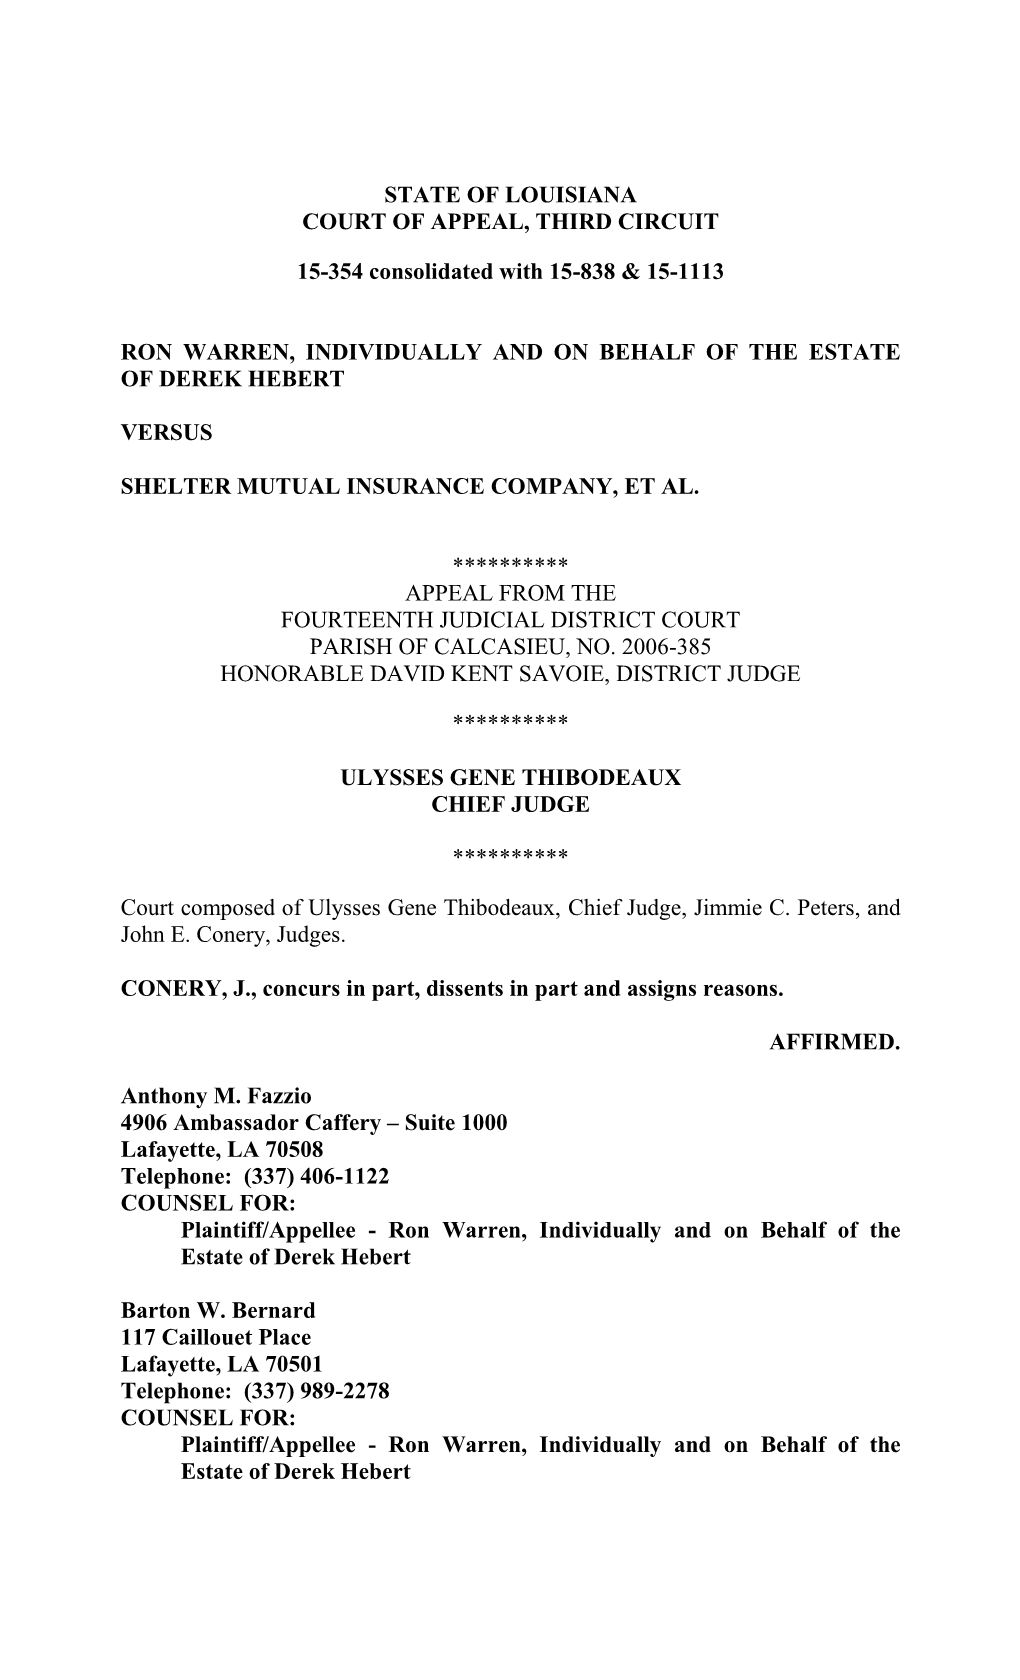 State of Louisiana Court of Appeal, Third Circuit 15-354